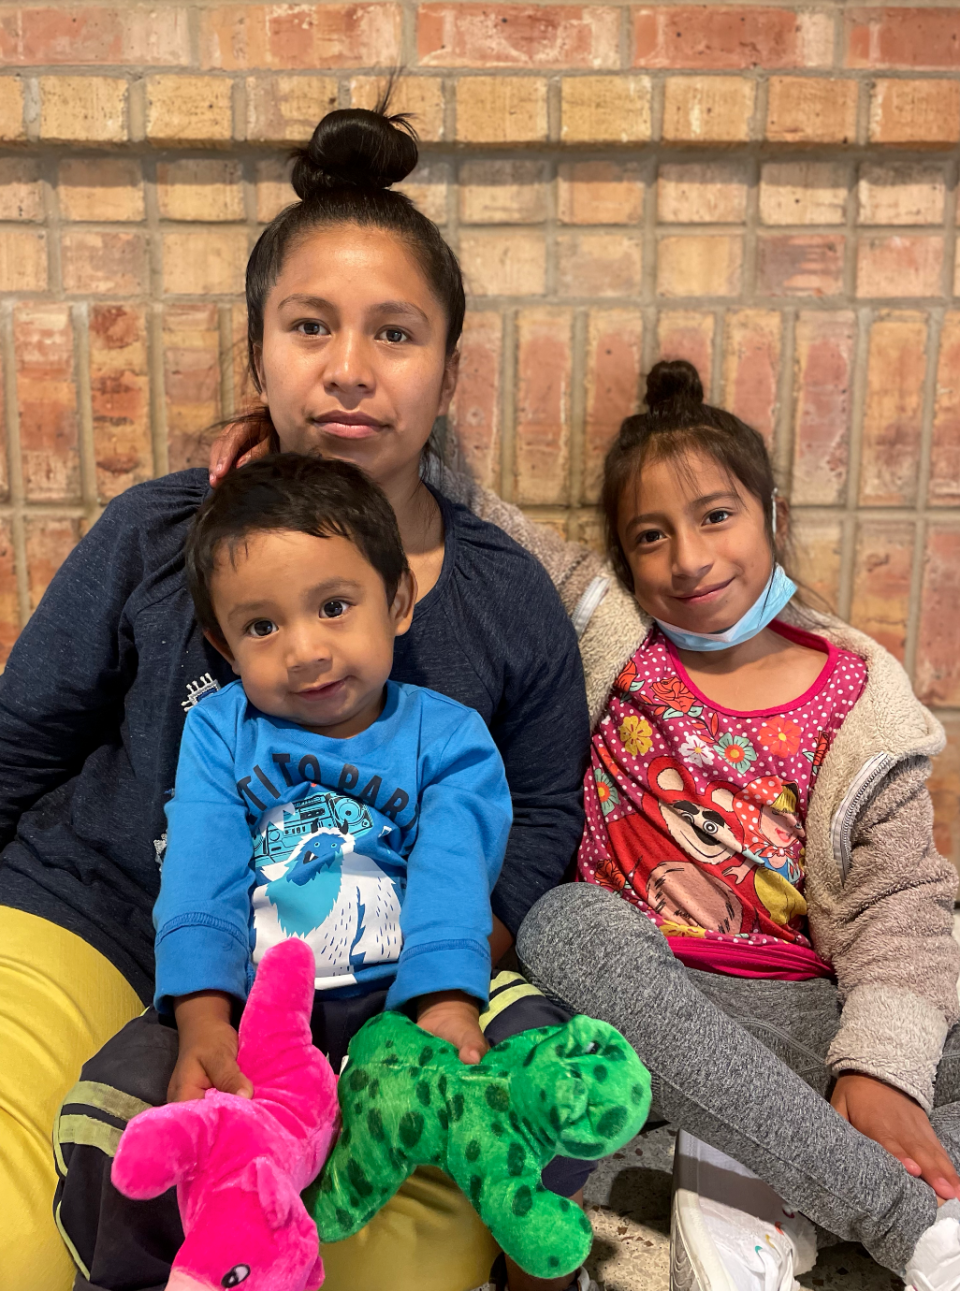 Jacqueline and her two children sit at a bus station in Brownsville, Texas waiting for the bus that would them to North Carolina. She will be staying with relatives until a judge makes a decision in her family's asylum case. / Credit: Natacha Larnaud